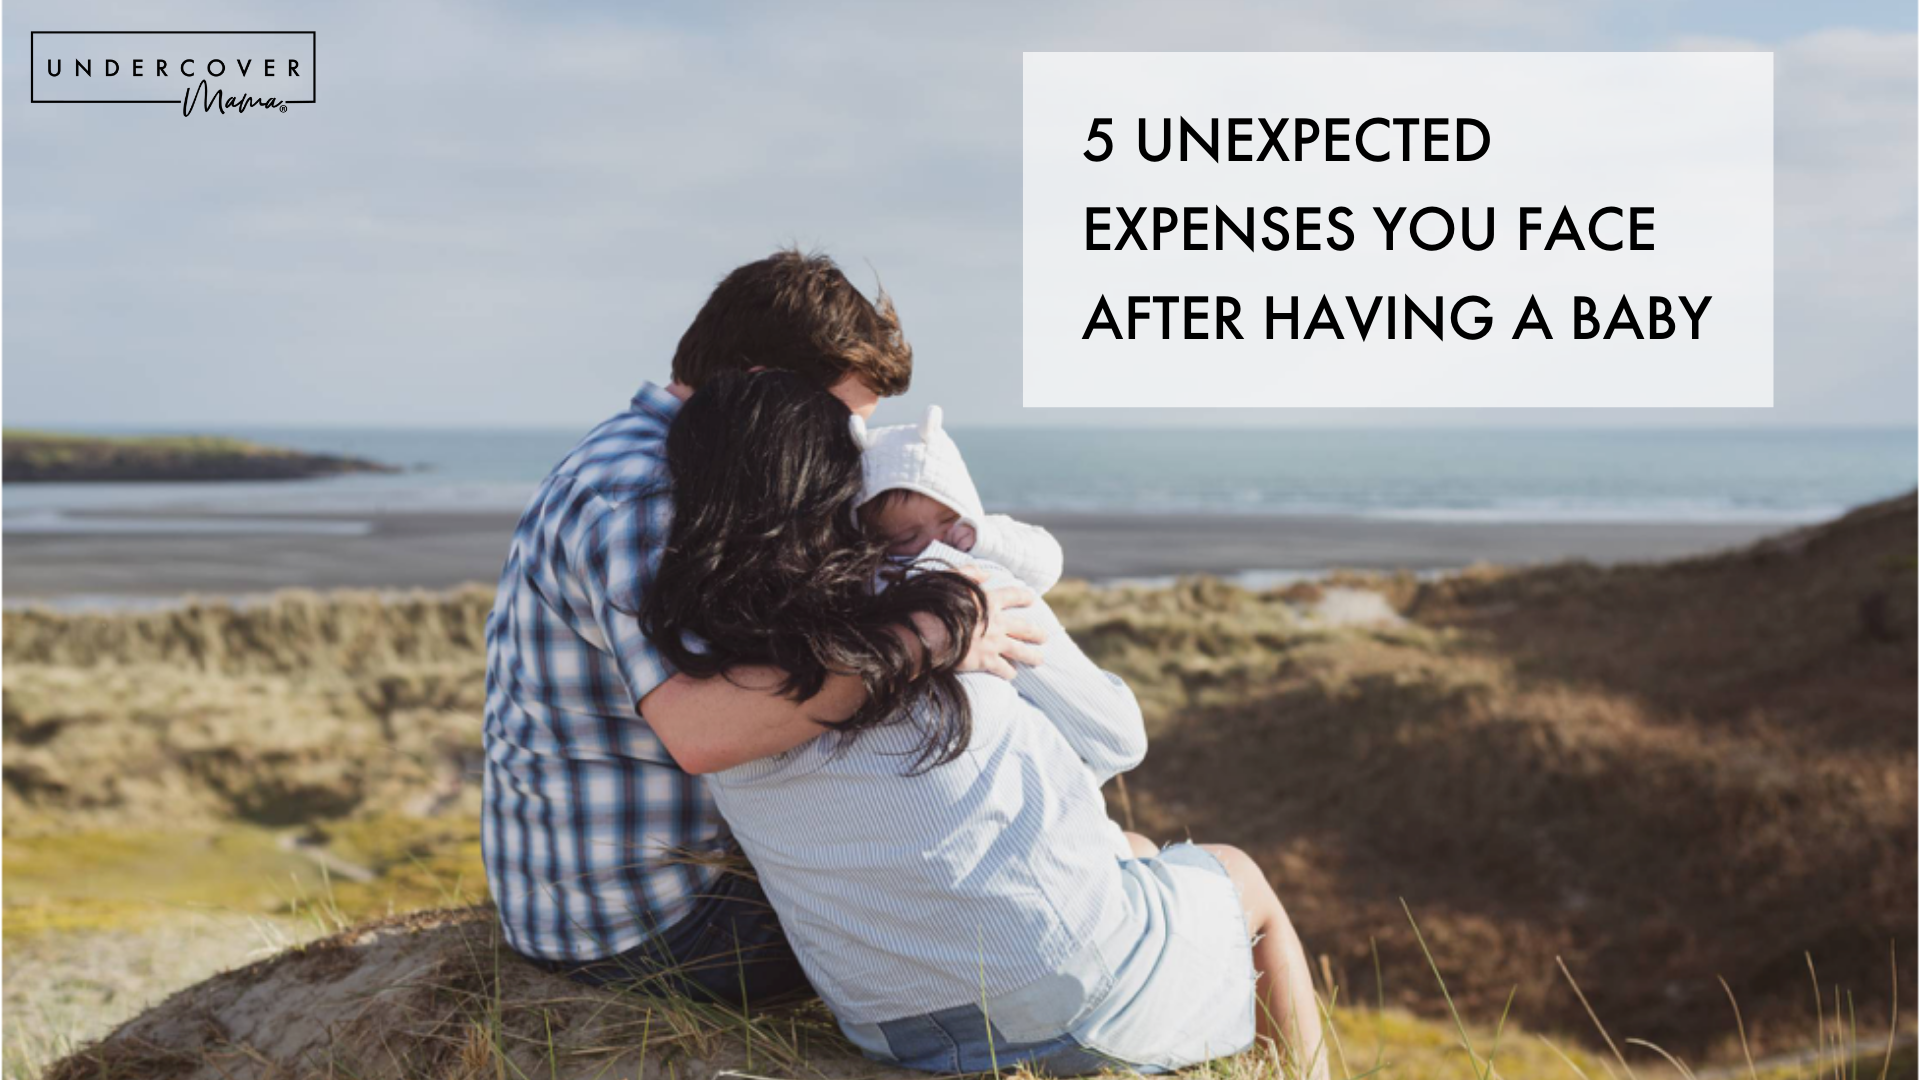 5 Unexpected Expenses You Face After Having a Baby